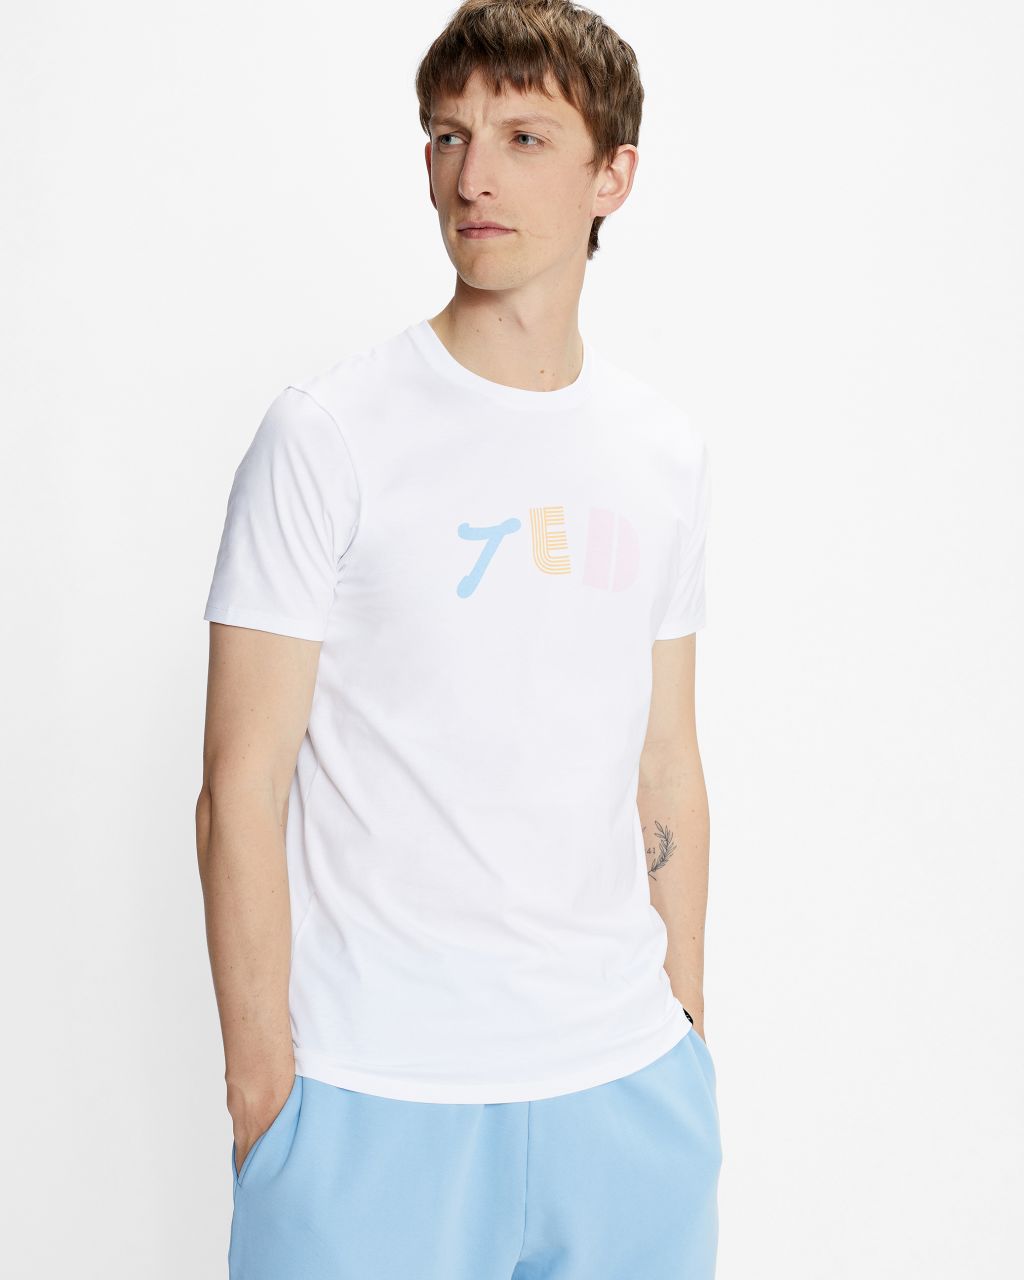 Ted branded tee